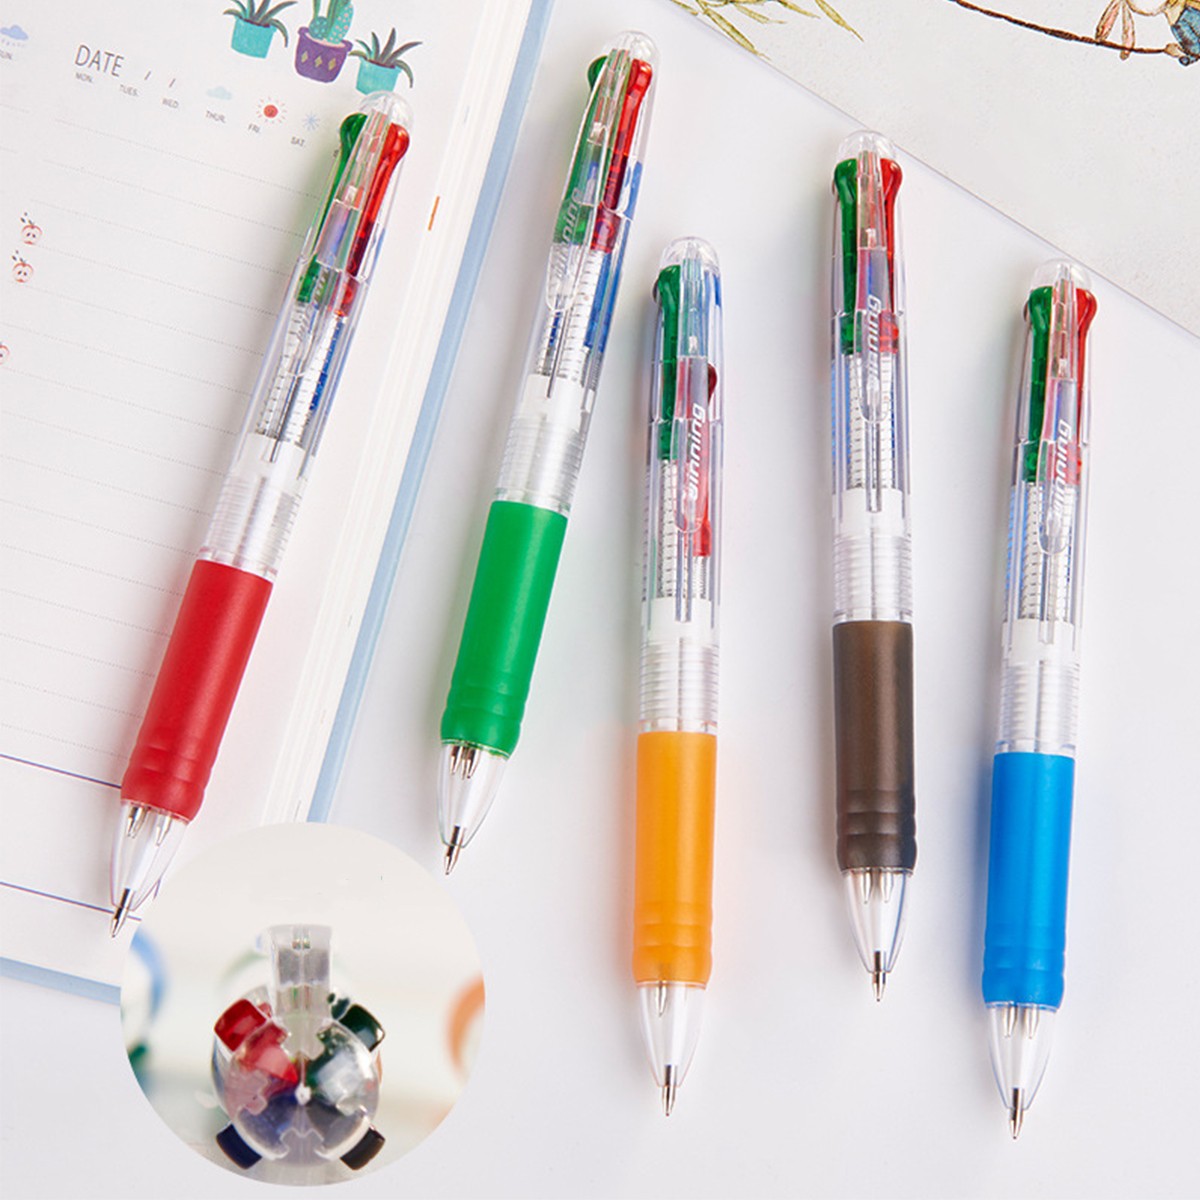 https://img.kwcdn.com/product/colorful-ballpoint-pens/d69d2f15w98k18-5fbbeed8/open/2023-07-19/1689762120754-bf918182167140e7a045eba240c49449-goods.jpeg?imageView2/2/w/500/q/60/format/webp